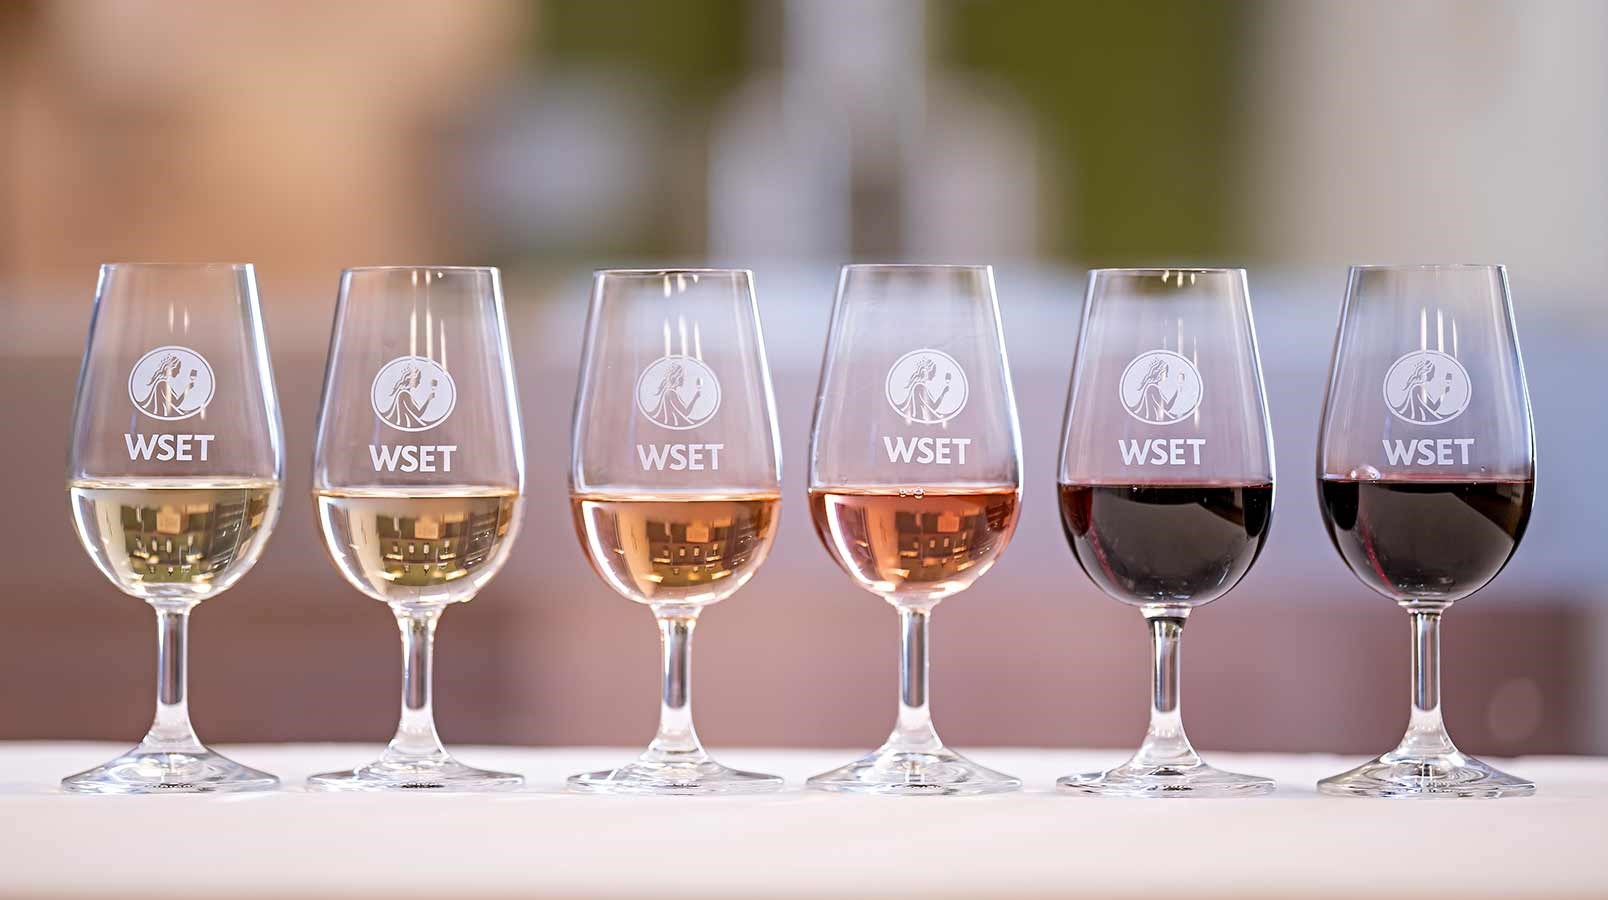 Line of wine glasses  with WSET logo containing white, rose and red wine